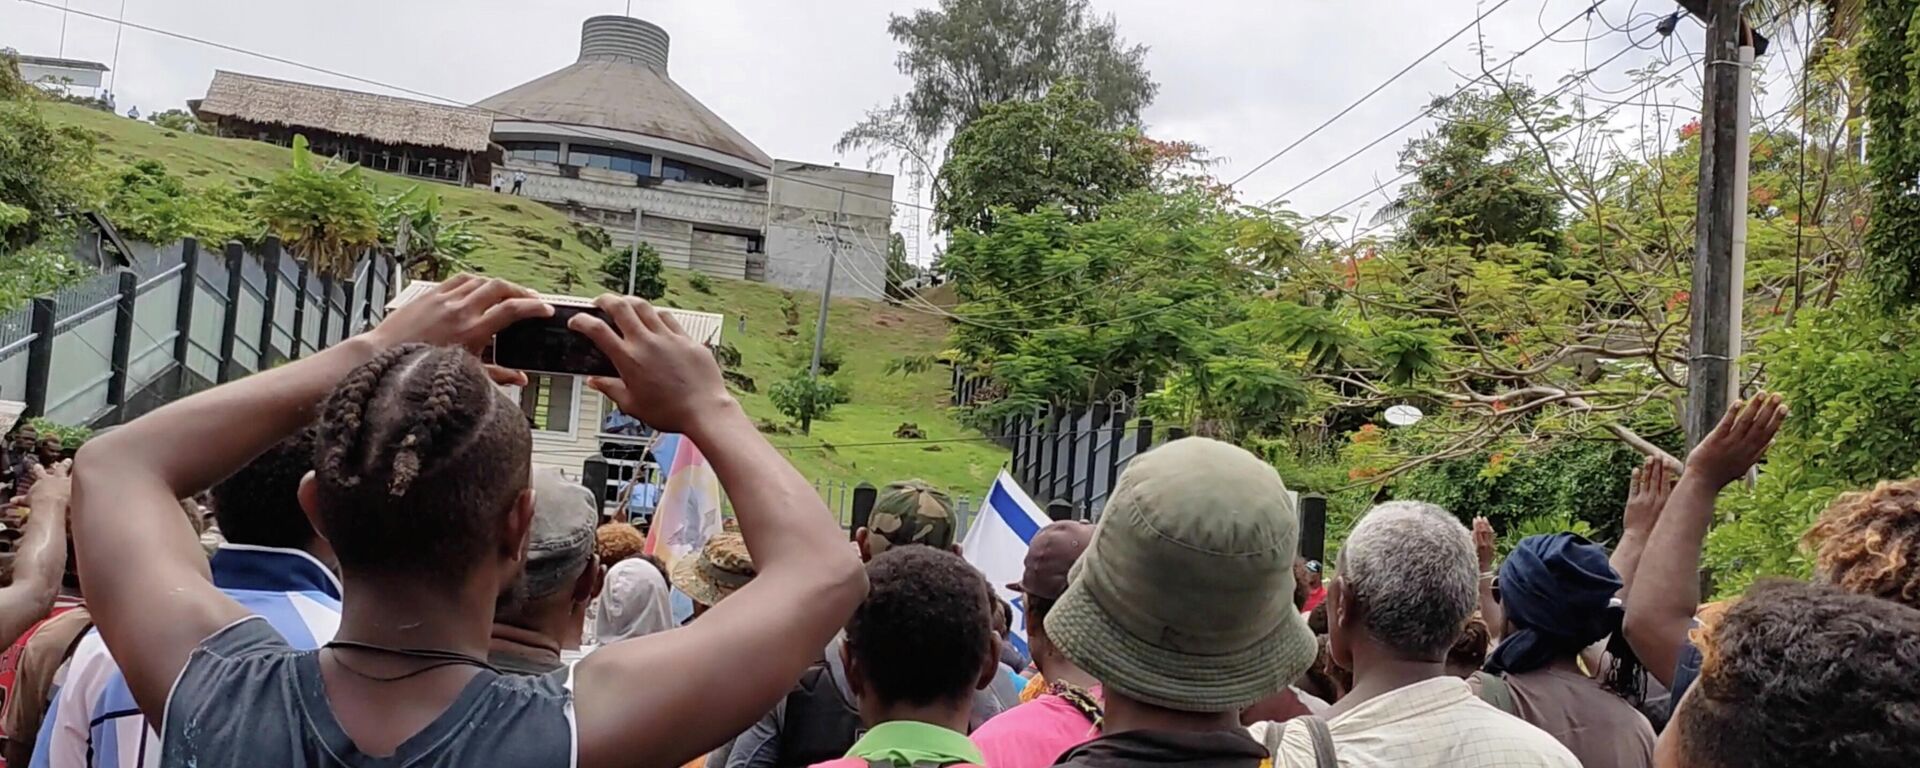 Protestors gather outside the parliament building in Honiara, Solomon Islands, November 24, 2021, in this screen grab obtained by Reuters, from a social media video - Sputnik International, 1920, 25.11.2021